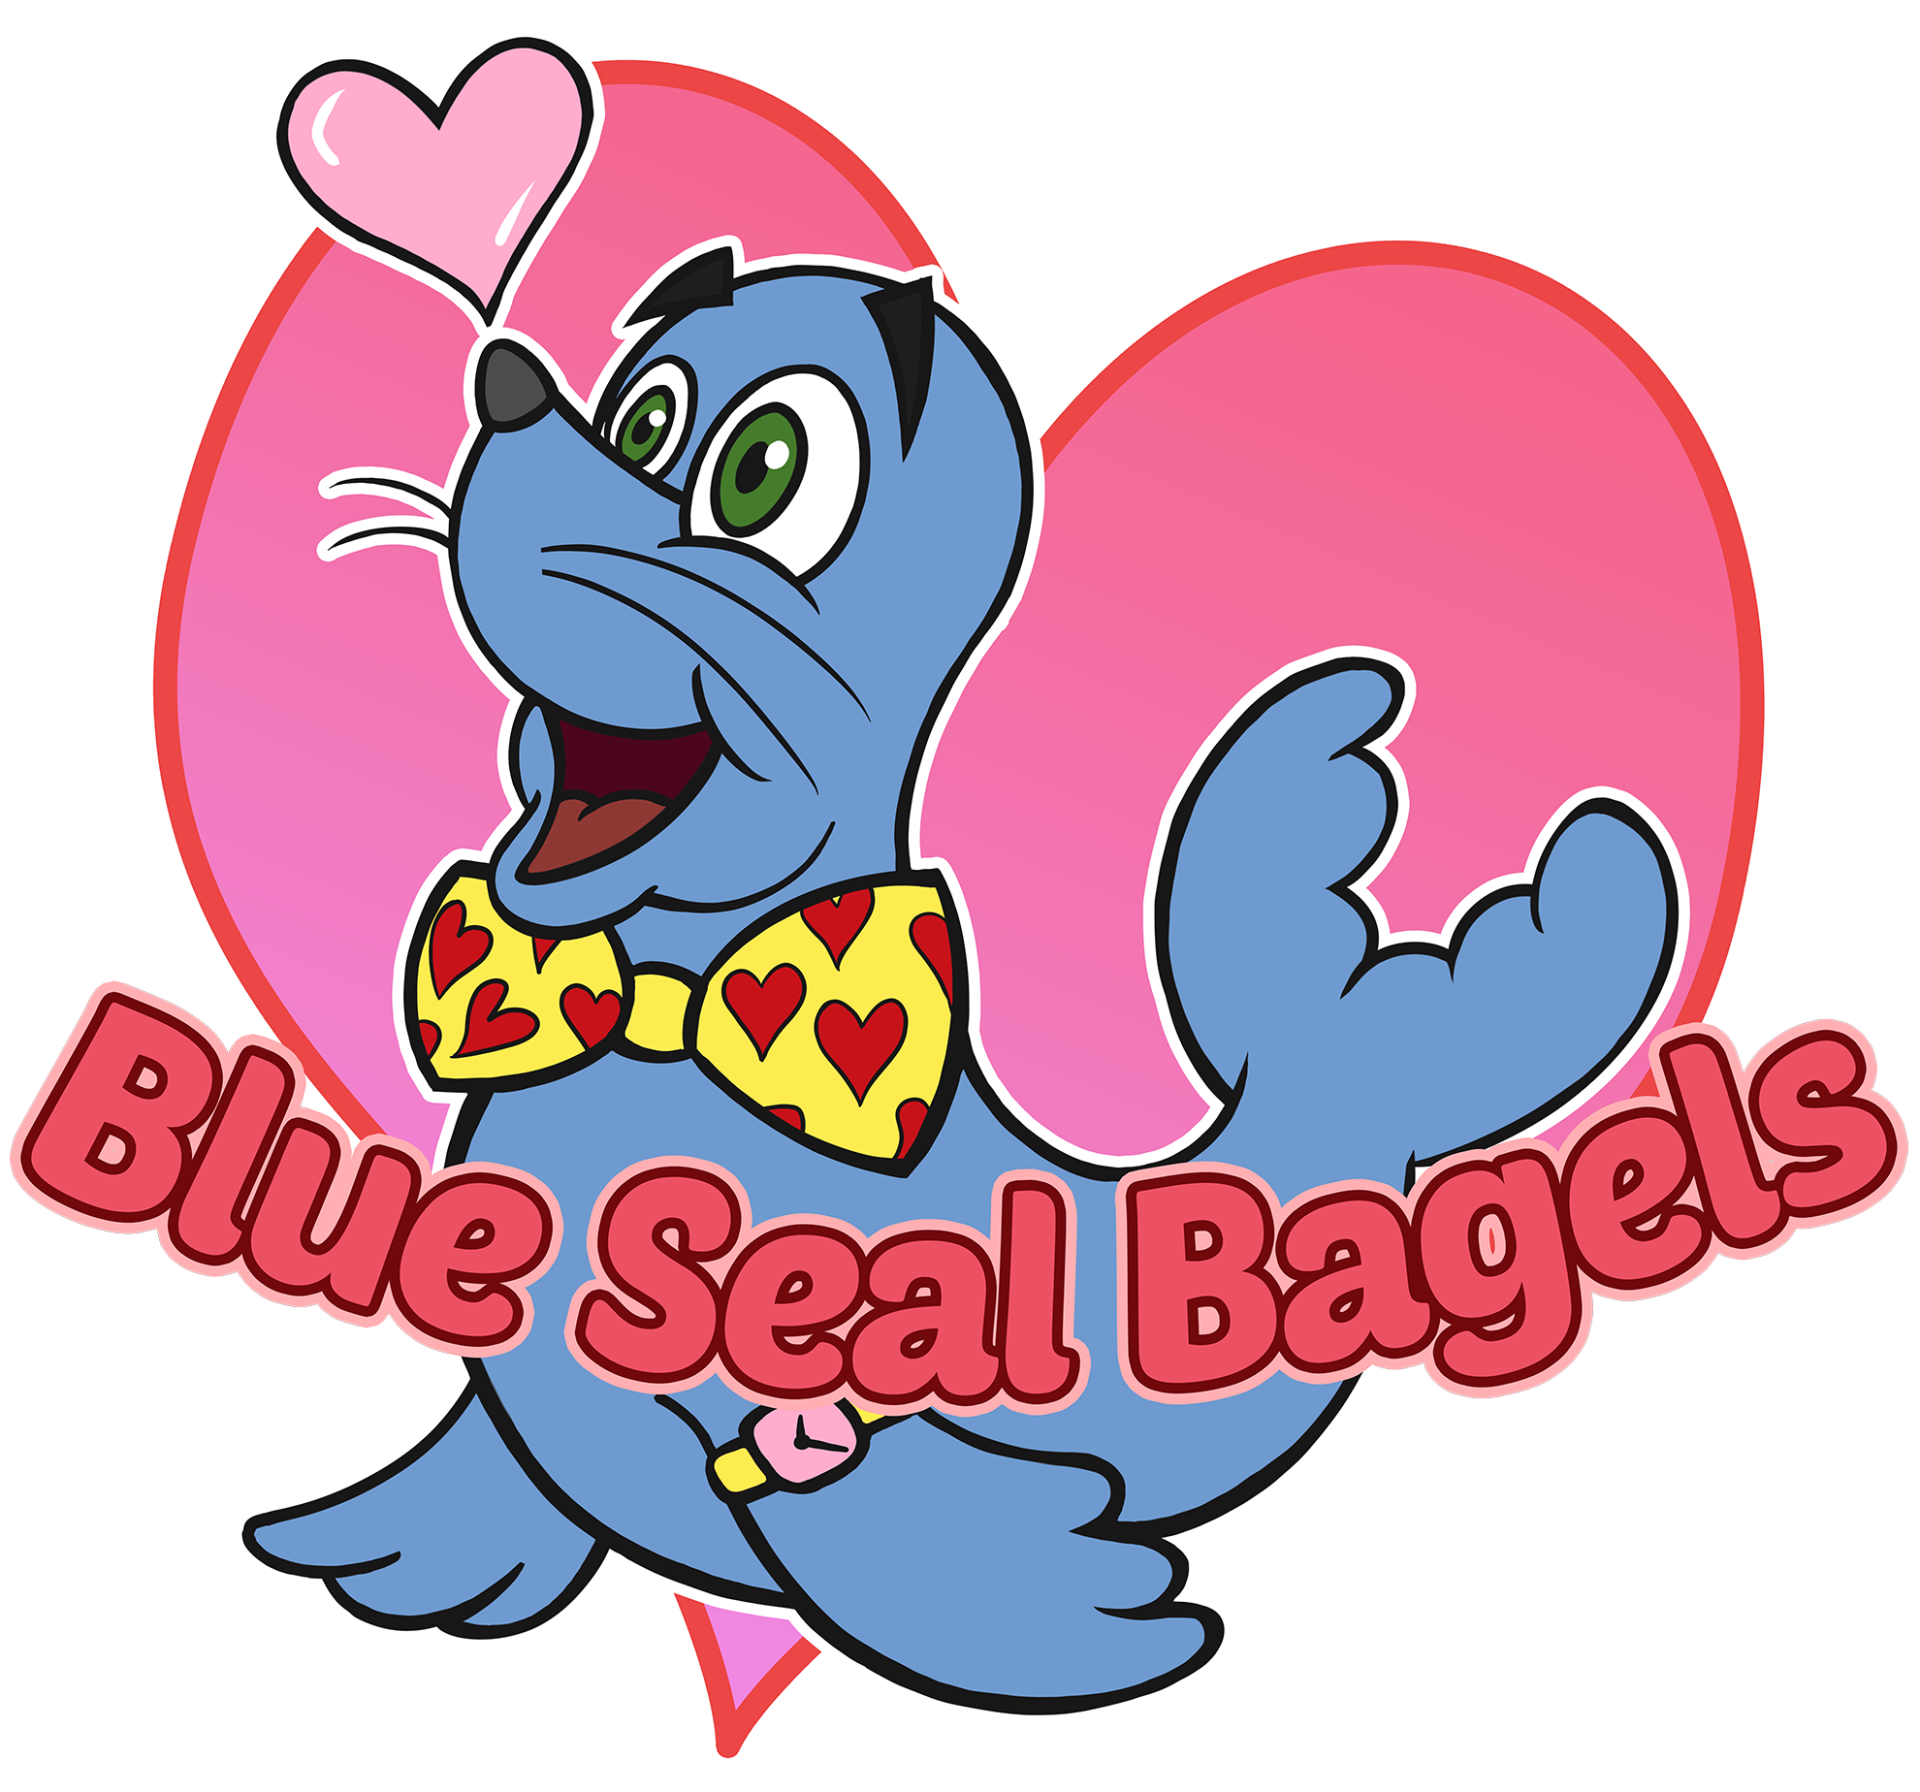 Blue Seal Bagels - Buster Valentine's Day